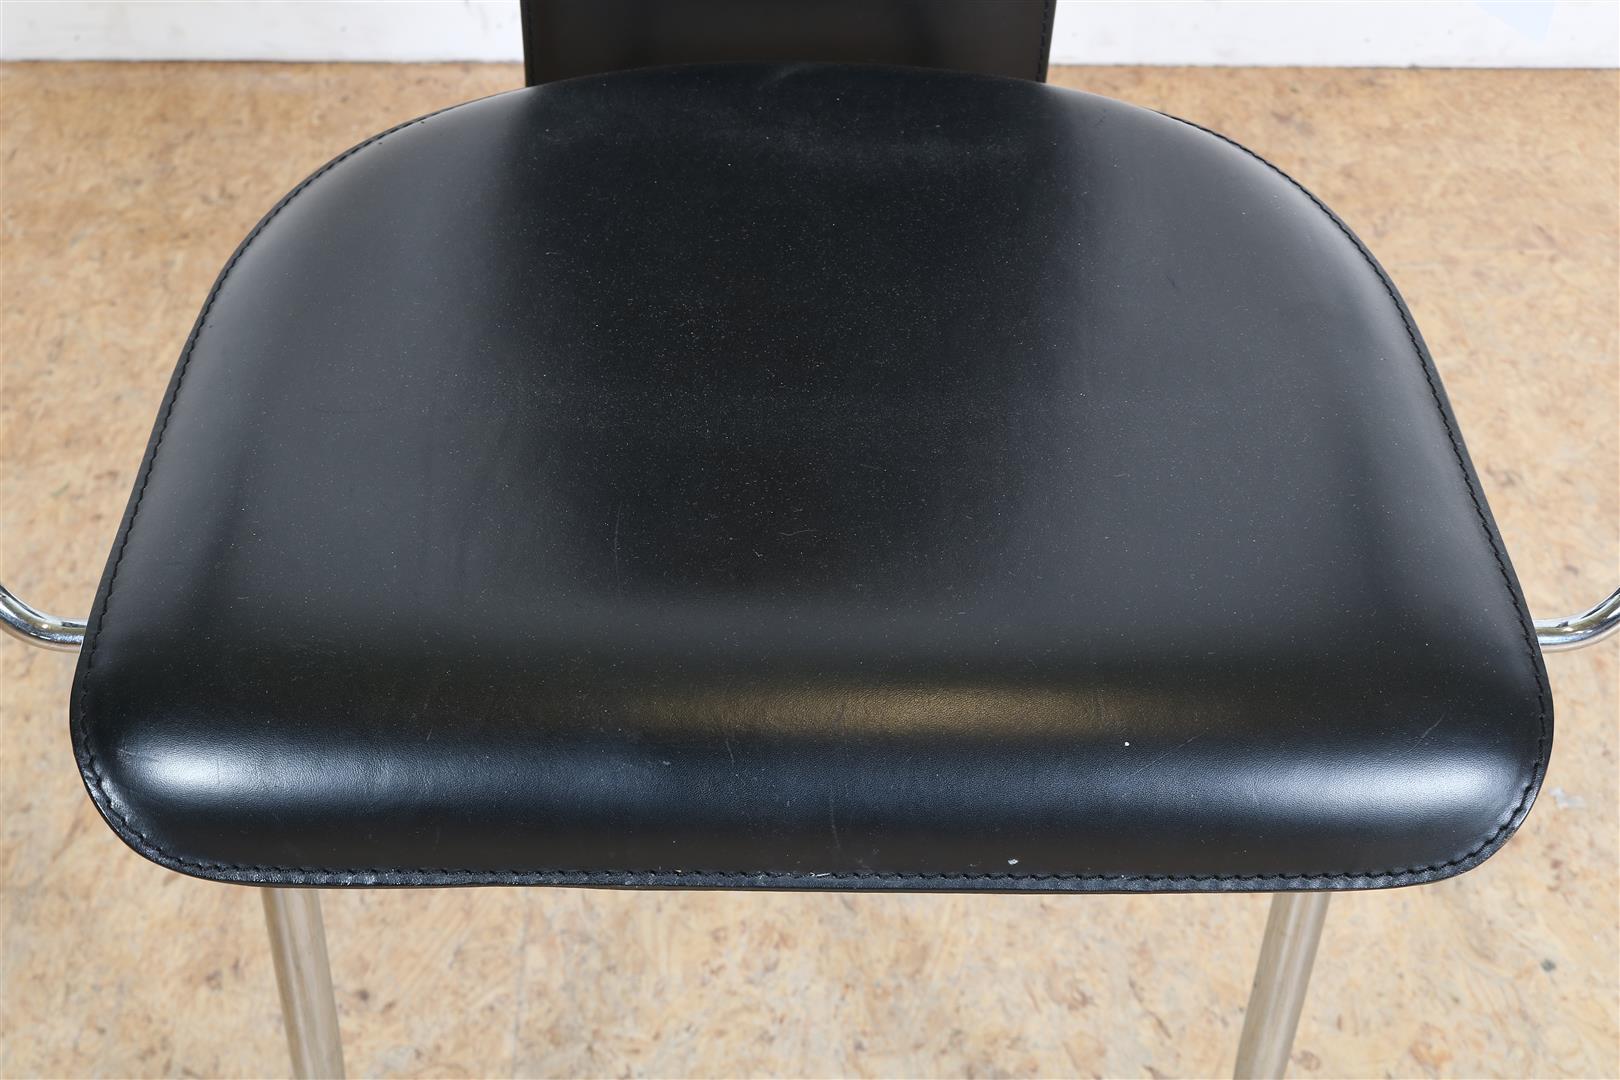 Series of 11bauhaus style dining room chairs, including 1 armchair with black saddle leather seat on - Image 5 of 7